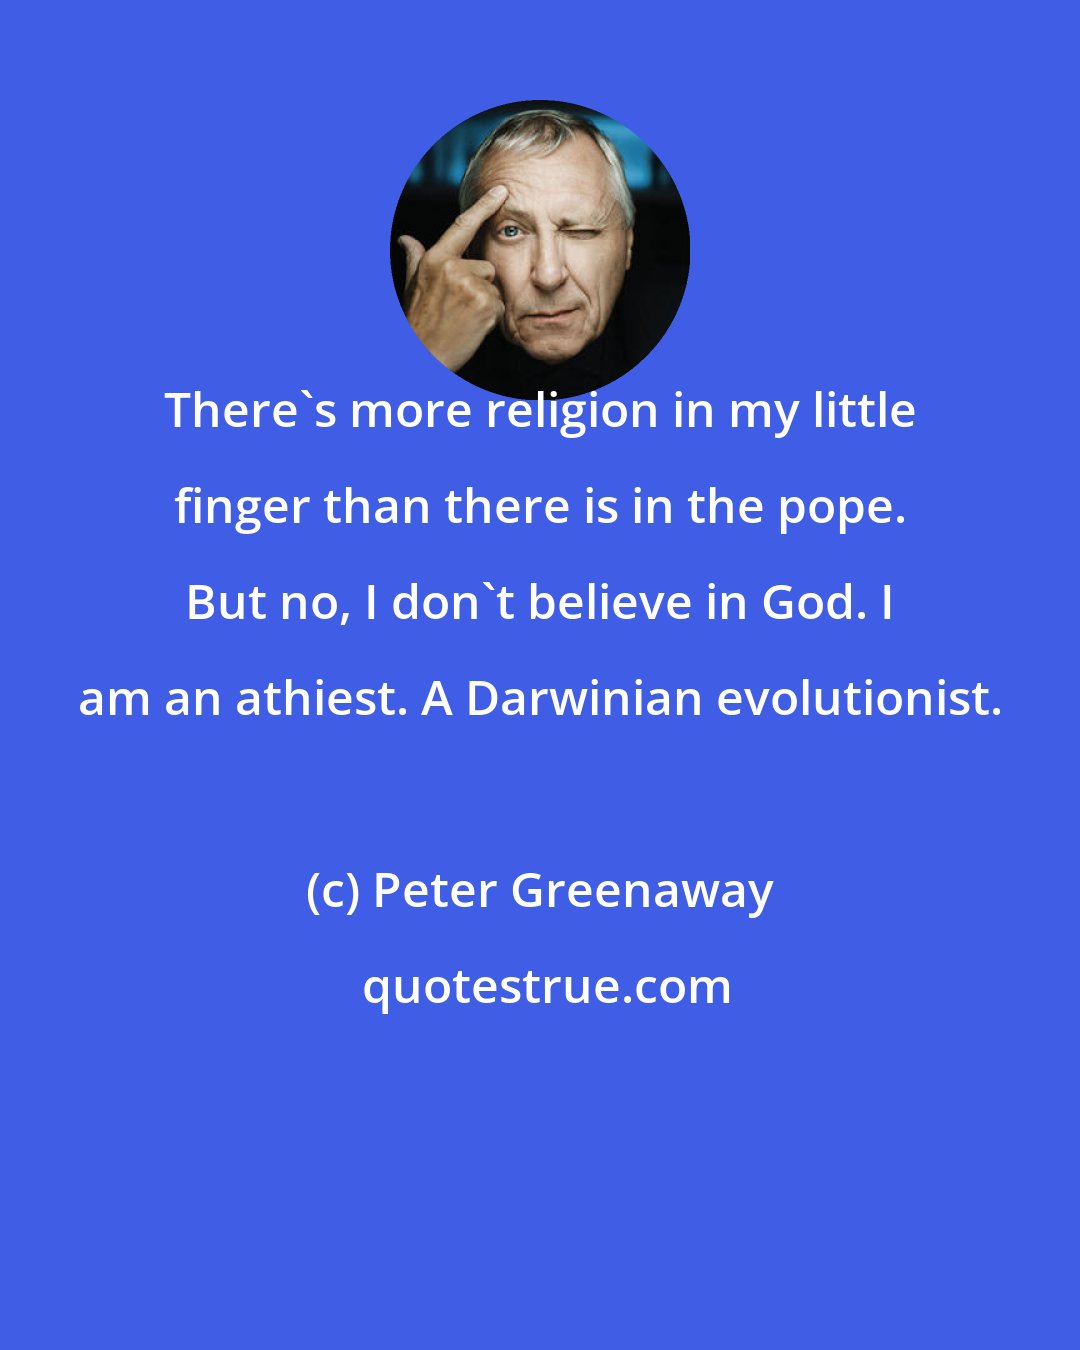 Peter Greenaway: There's more religion in my little finger than there is in the pope. But no, I don't believe in God. I am an athiest. A Darwinian evolutionist.